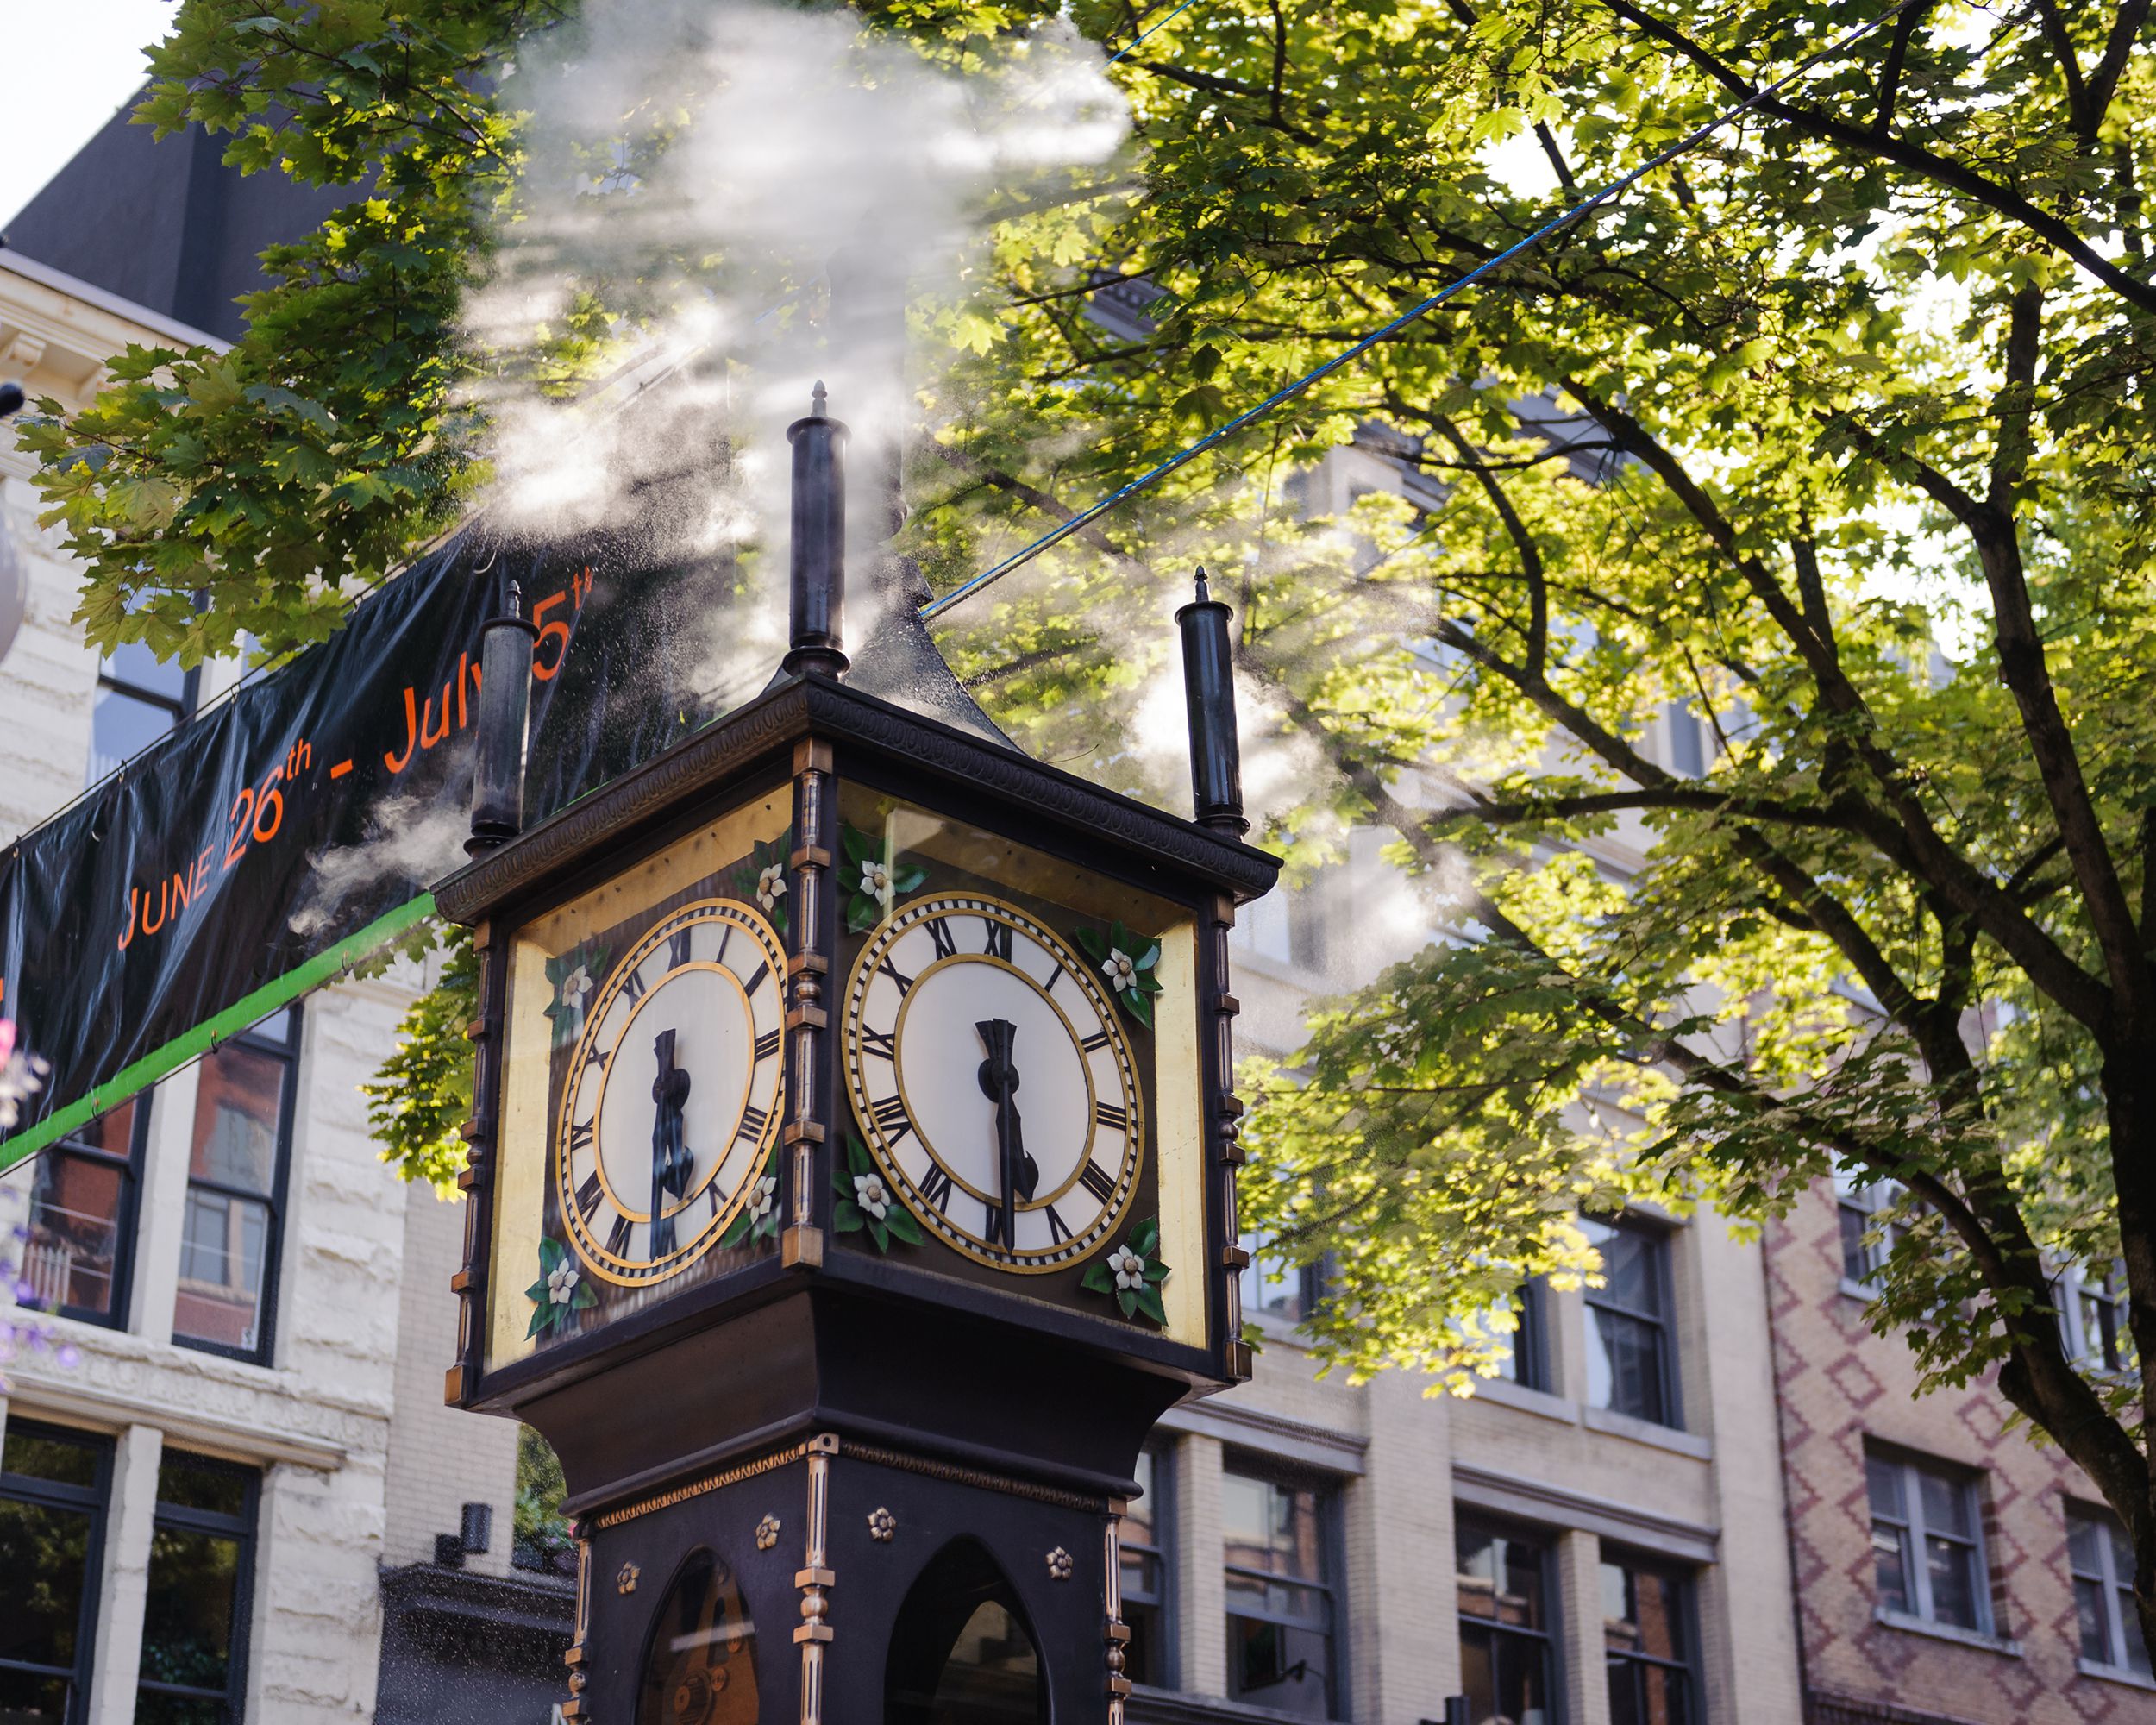 <p><strong>Vancouver, British Columbia</strong></p> <p>This old-fashioned steam clock seems like a quirky Vancouver charmer until you find out the truth: It's not exactly old, and there's a <a href="https://www.atlasobscura.com/places/steam-clock-gastown-vancouver">hidden electric motor</a> that keeps it working properly. "It was built in the 1970s, but has no historical relevance to any ancient clock, and is only partially powered by steam," says Claudia Laroye, a travel writer and Vancouver resident. "There are so many other fabulous Vancouver spots and places deserving of love and attention, like Granville Island or Stanley Park." The upshot here: You won't be out any cash if you decide to take a gander.</p>